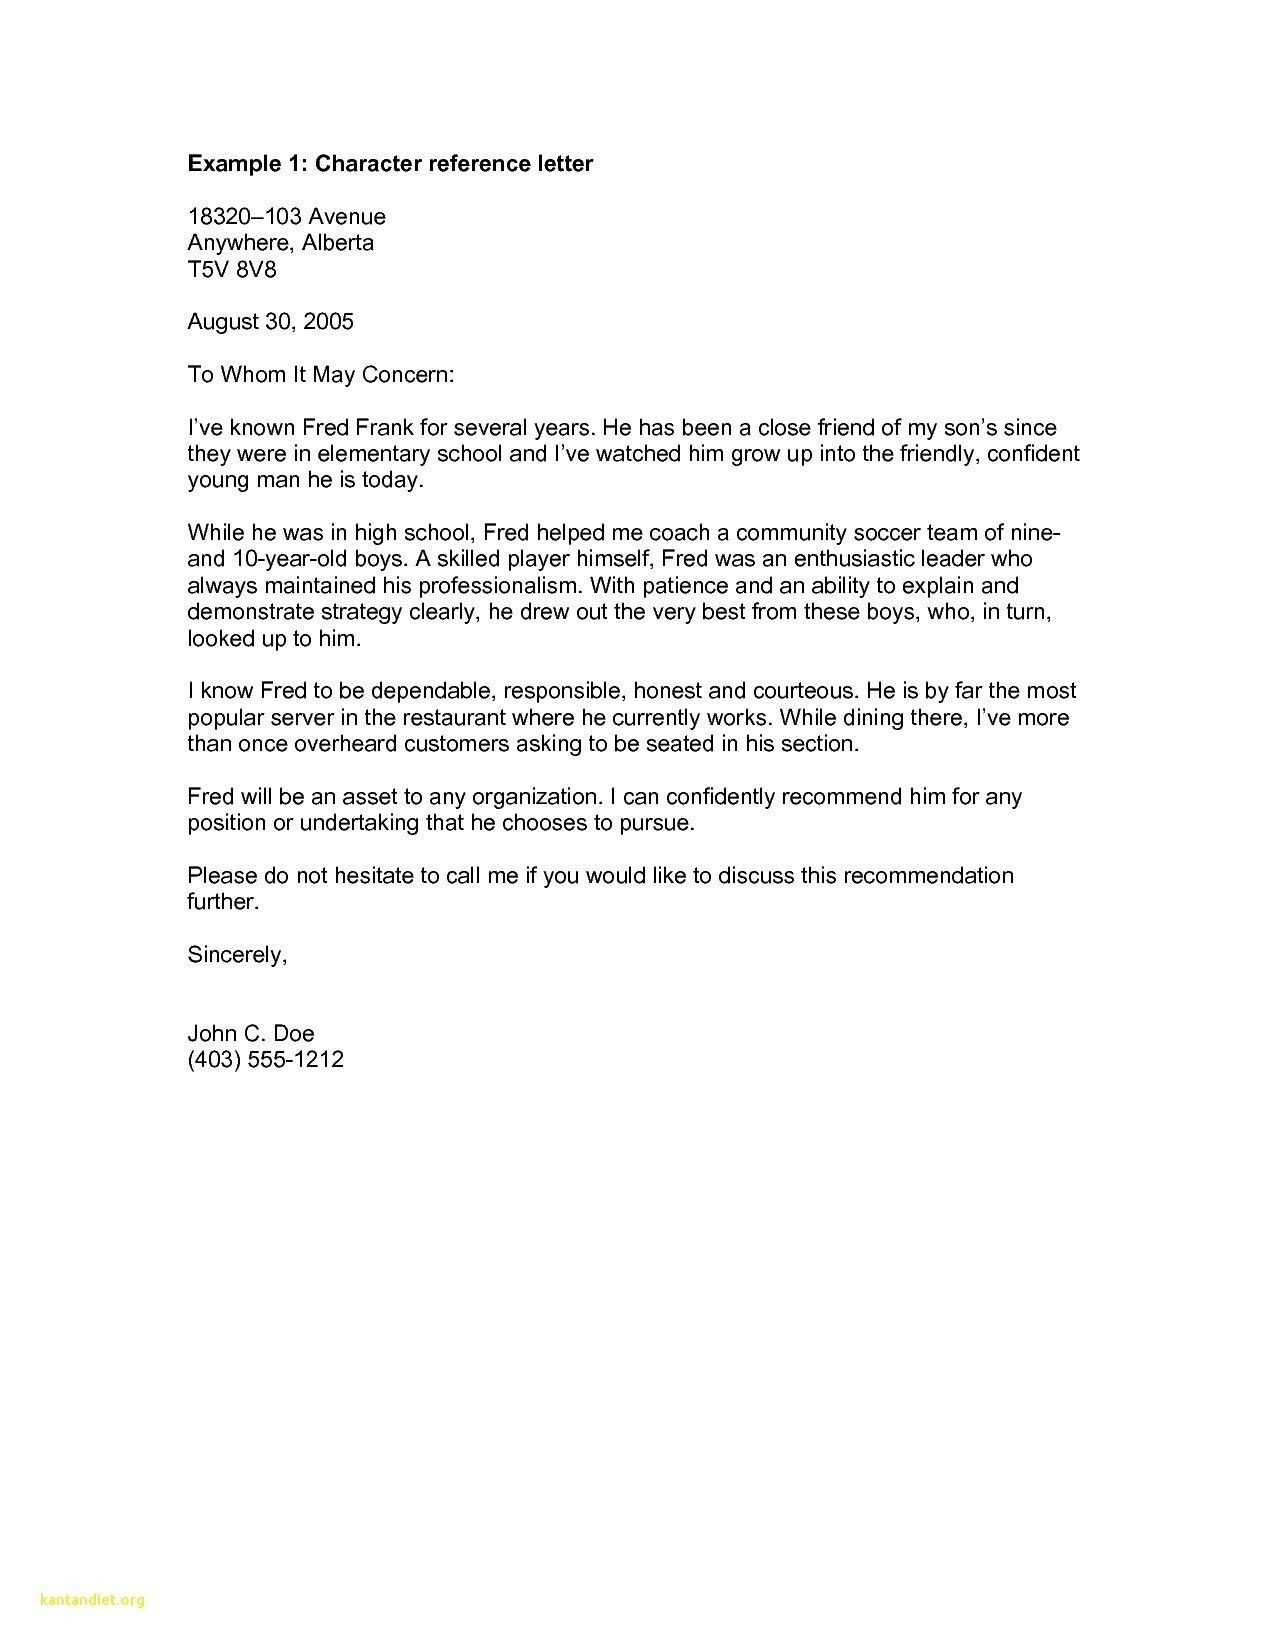 Personal Reference Letter Template Uk Why Personal Reference intended for size 1275 X 1650